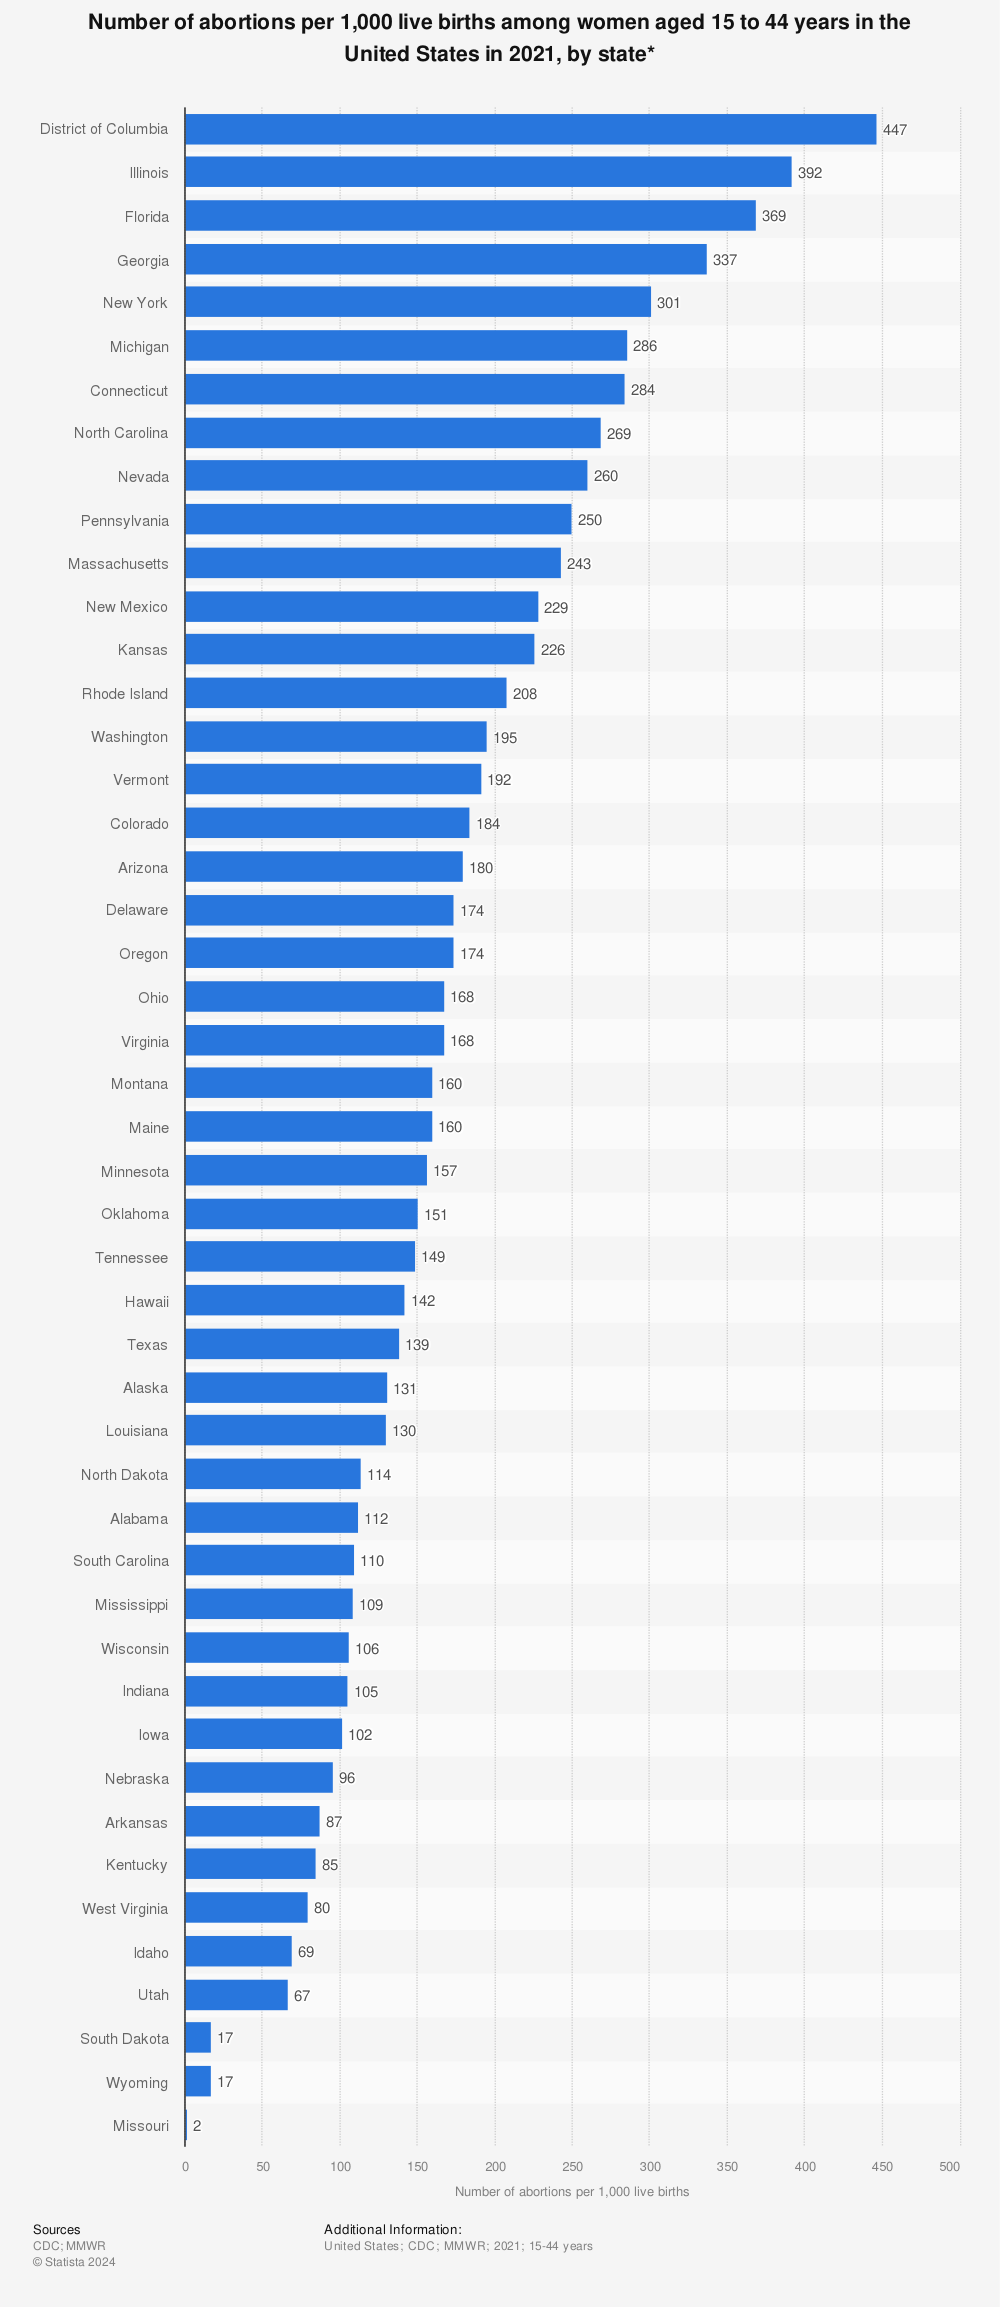 Statistic: Number of abortions per 1,000 live births among women aged 15 to 44 years in the United States in 2020, by state*  | Statista